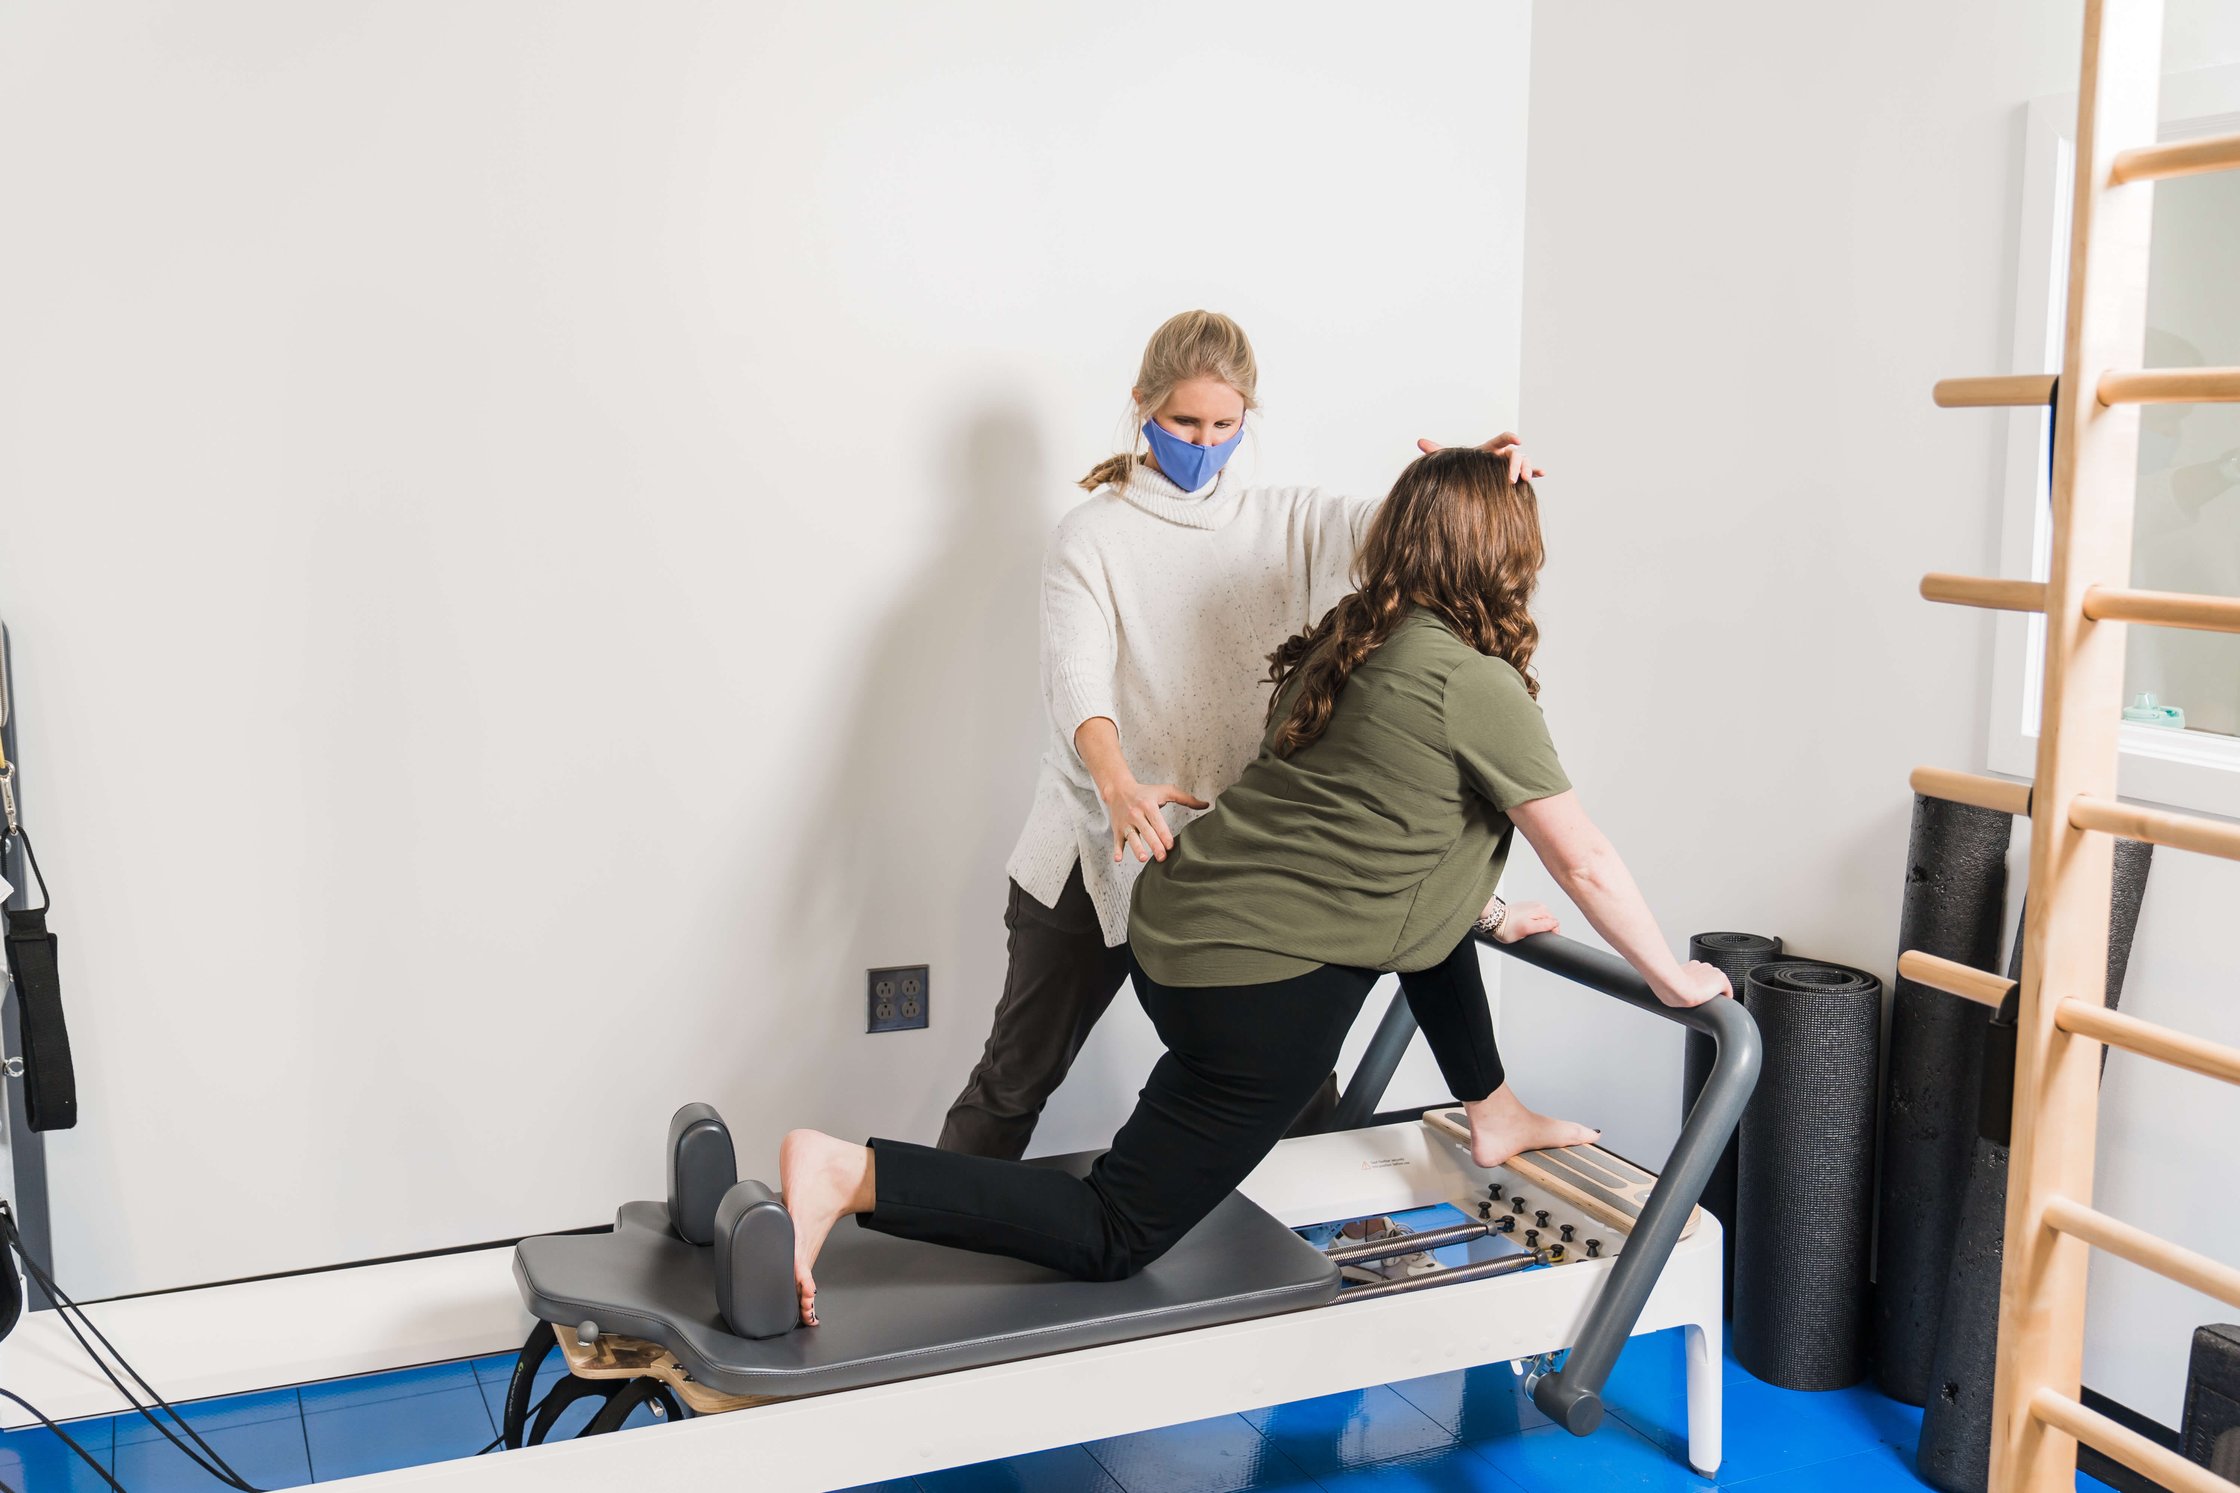 Reformer, Chair, Mat, or Tower? Comparing Pilates Equipment